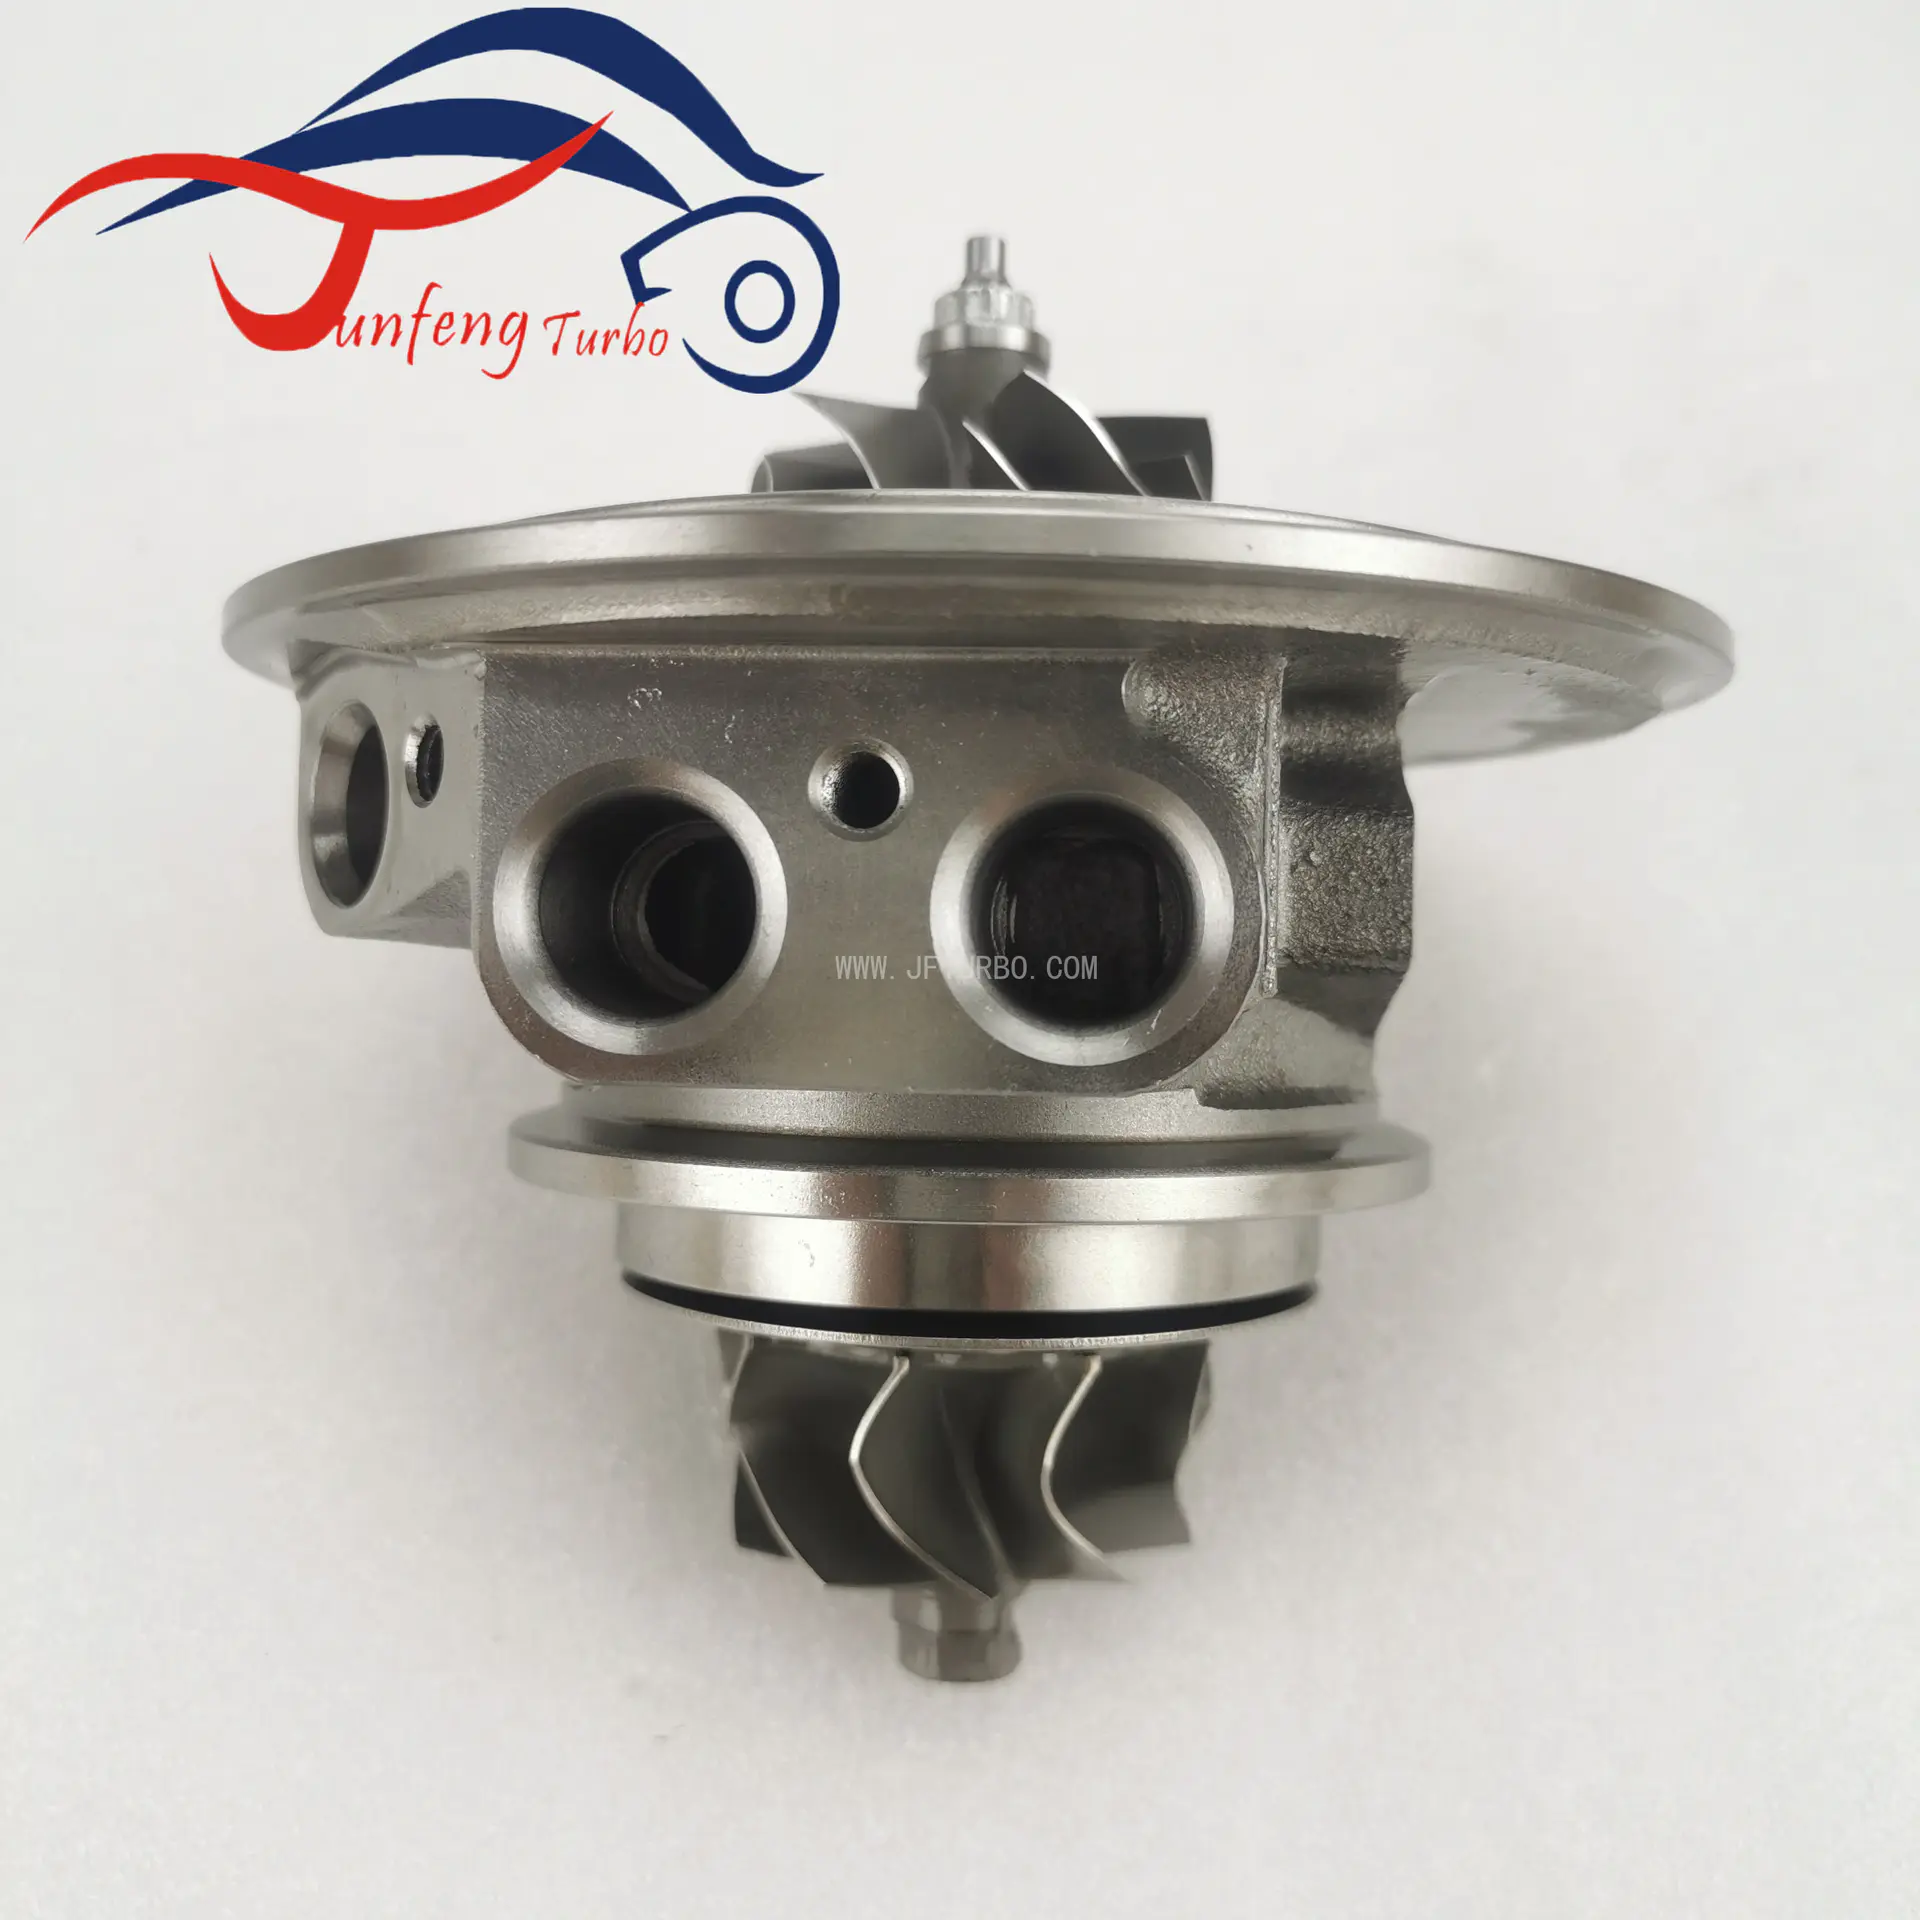 A278 CHRA A2780903880 A2780901380 827053-5001S Right turbocharger Cartridge for Mercedes Benz S500 4.7T M278 DELA 46 Engine